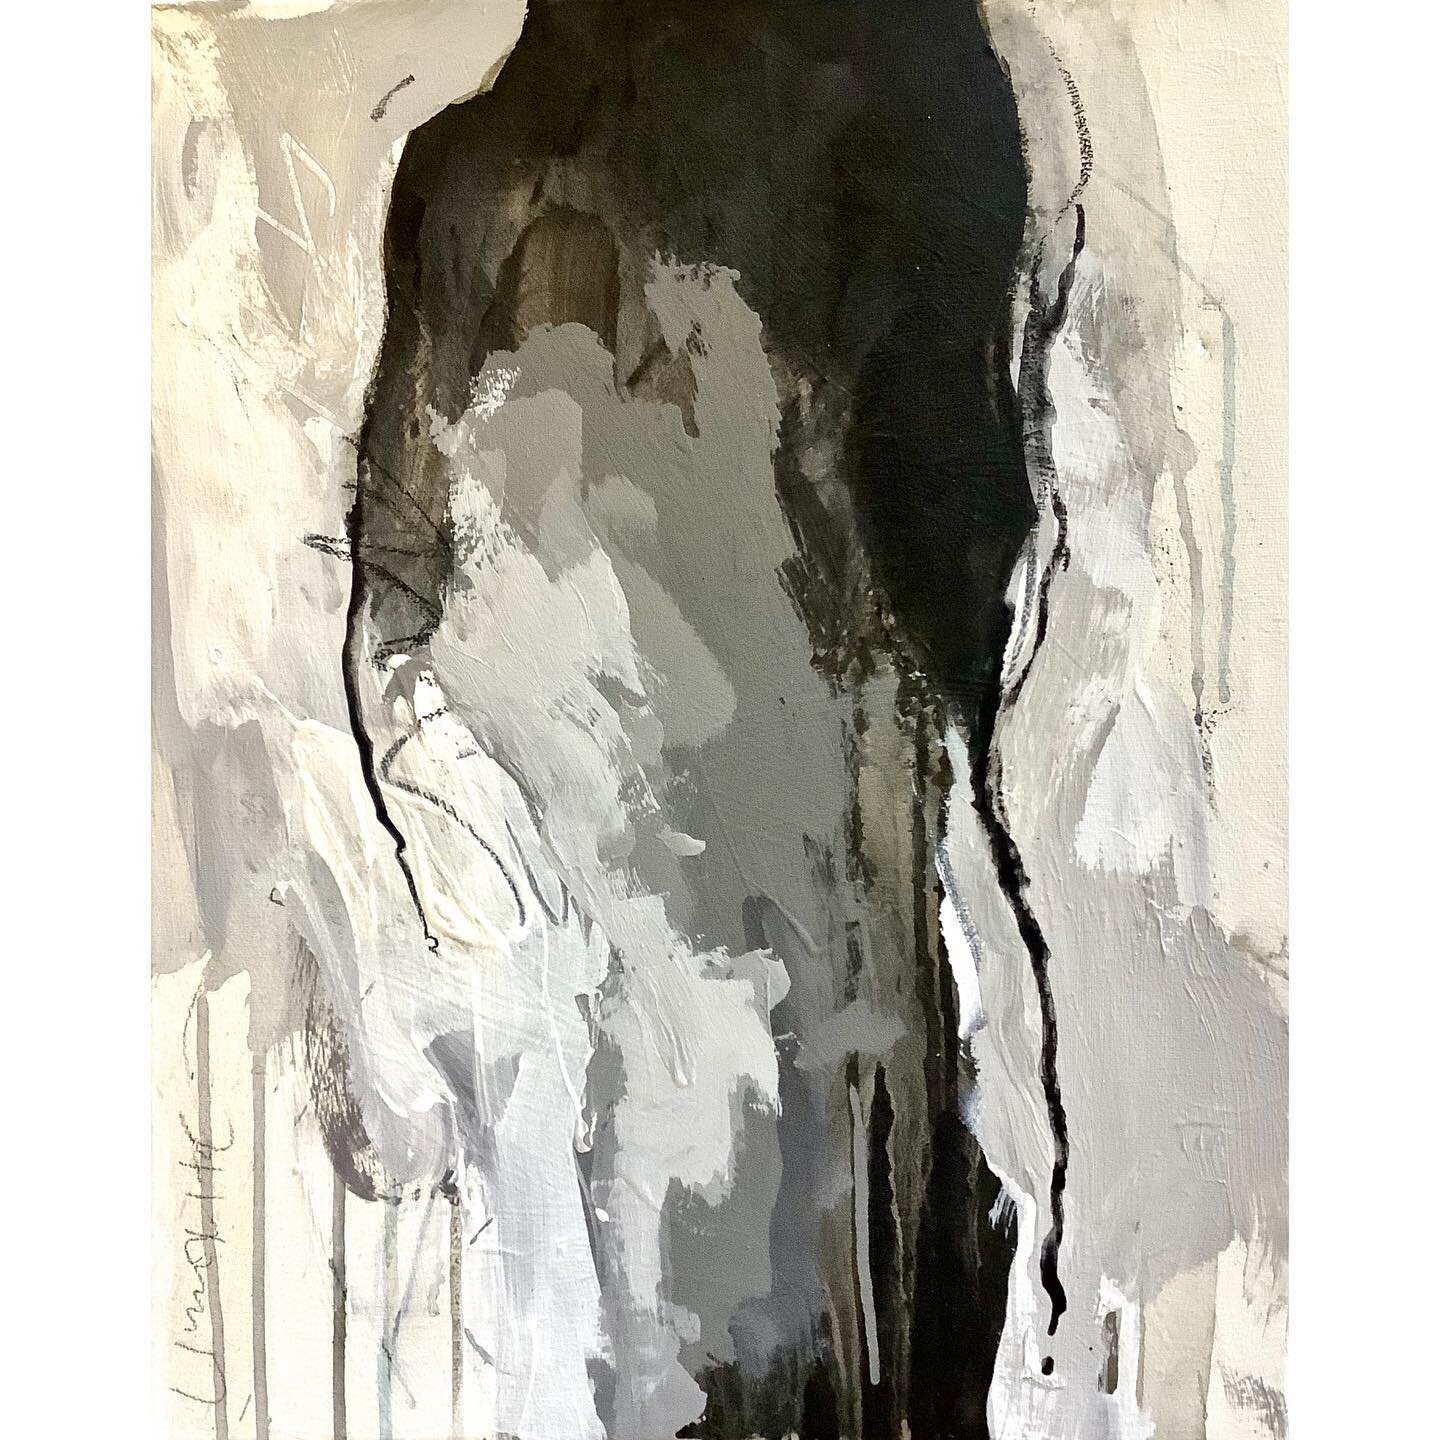 I was going to try and create these abstract figures by painting only. But, I couldn&rsquo;t help myself. I am such a &ldquo;line&rdquo; guy. Love me some drawing. &ldquo;Untitled&rdquo;, 20&rdquo;x 18&rdquo;, charcoal and acrylic on canvas.
.
.
.

#